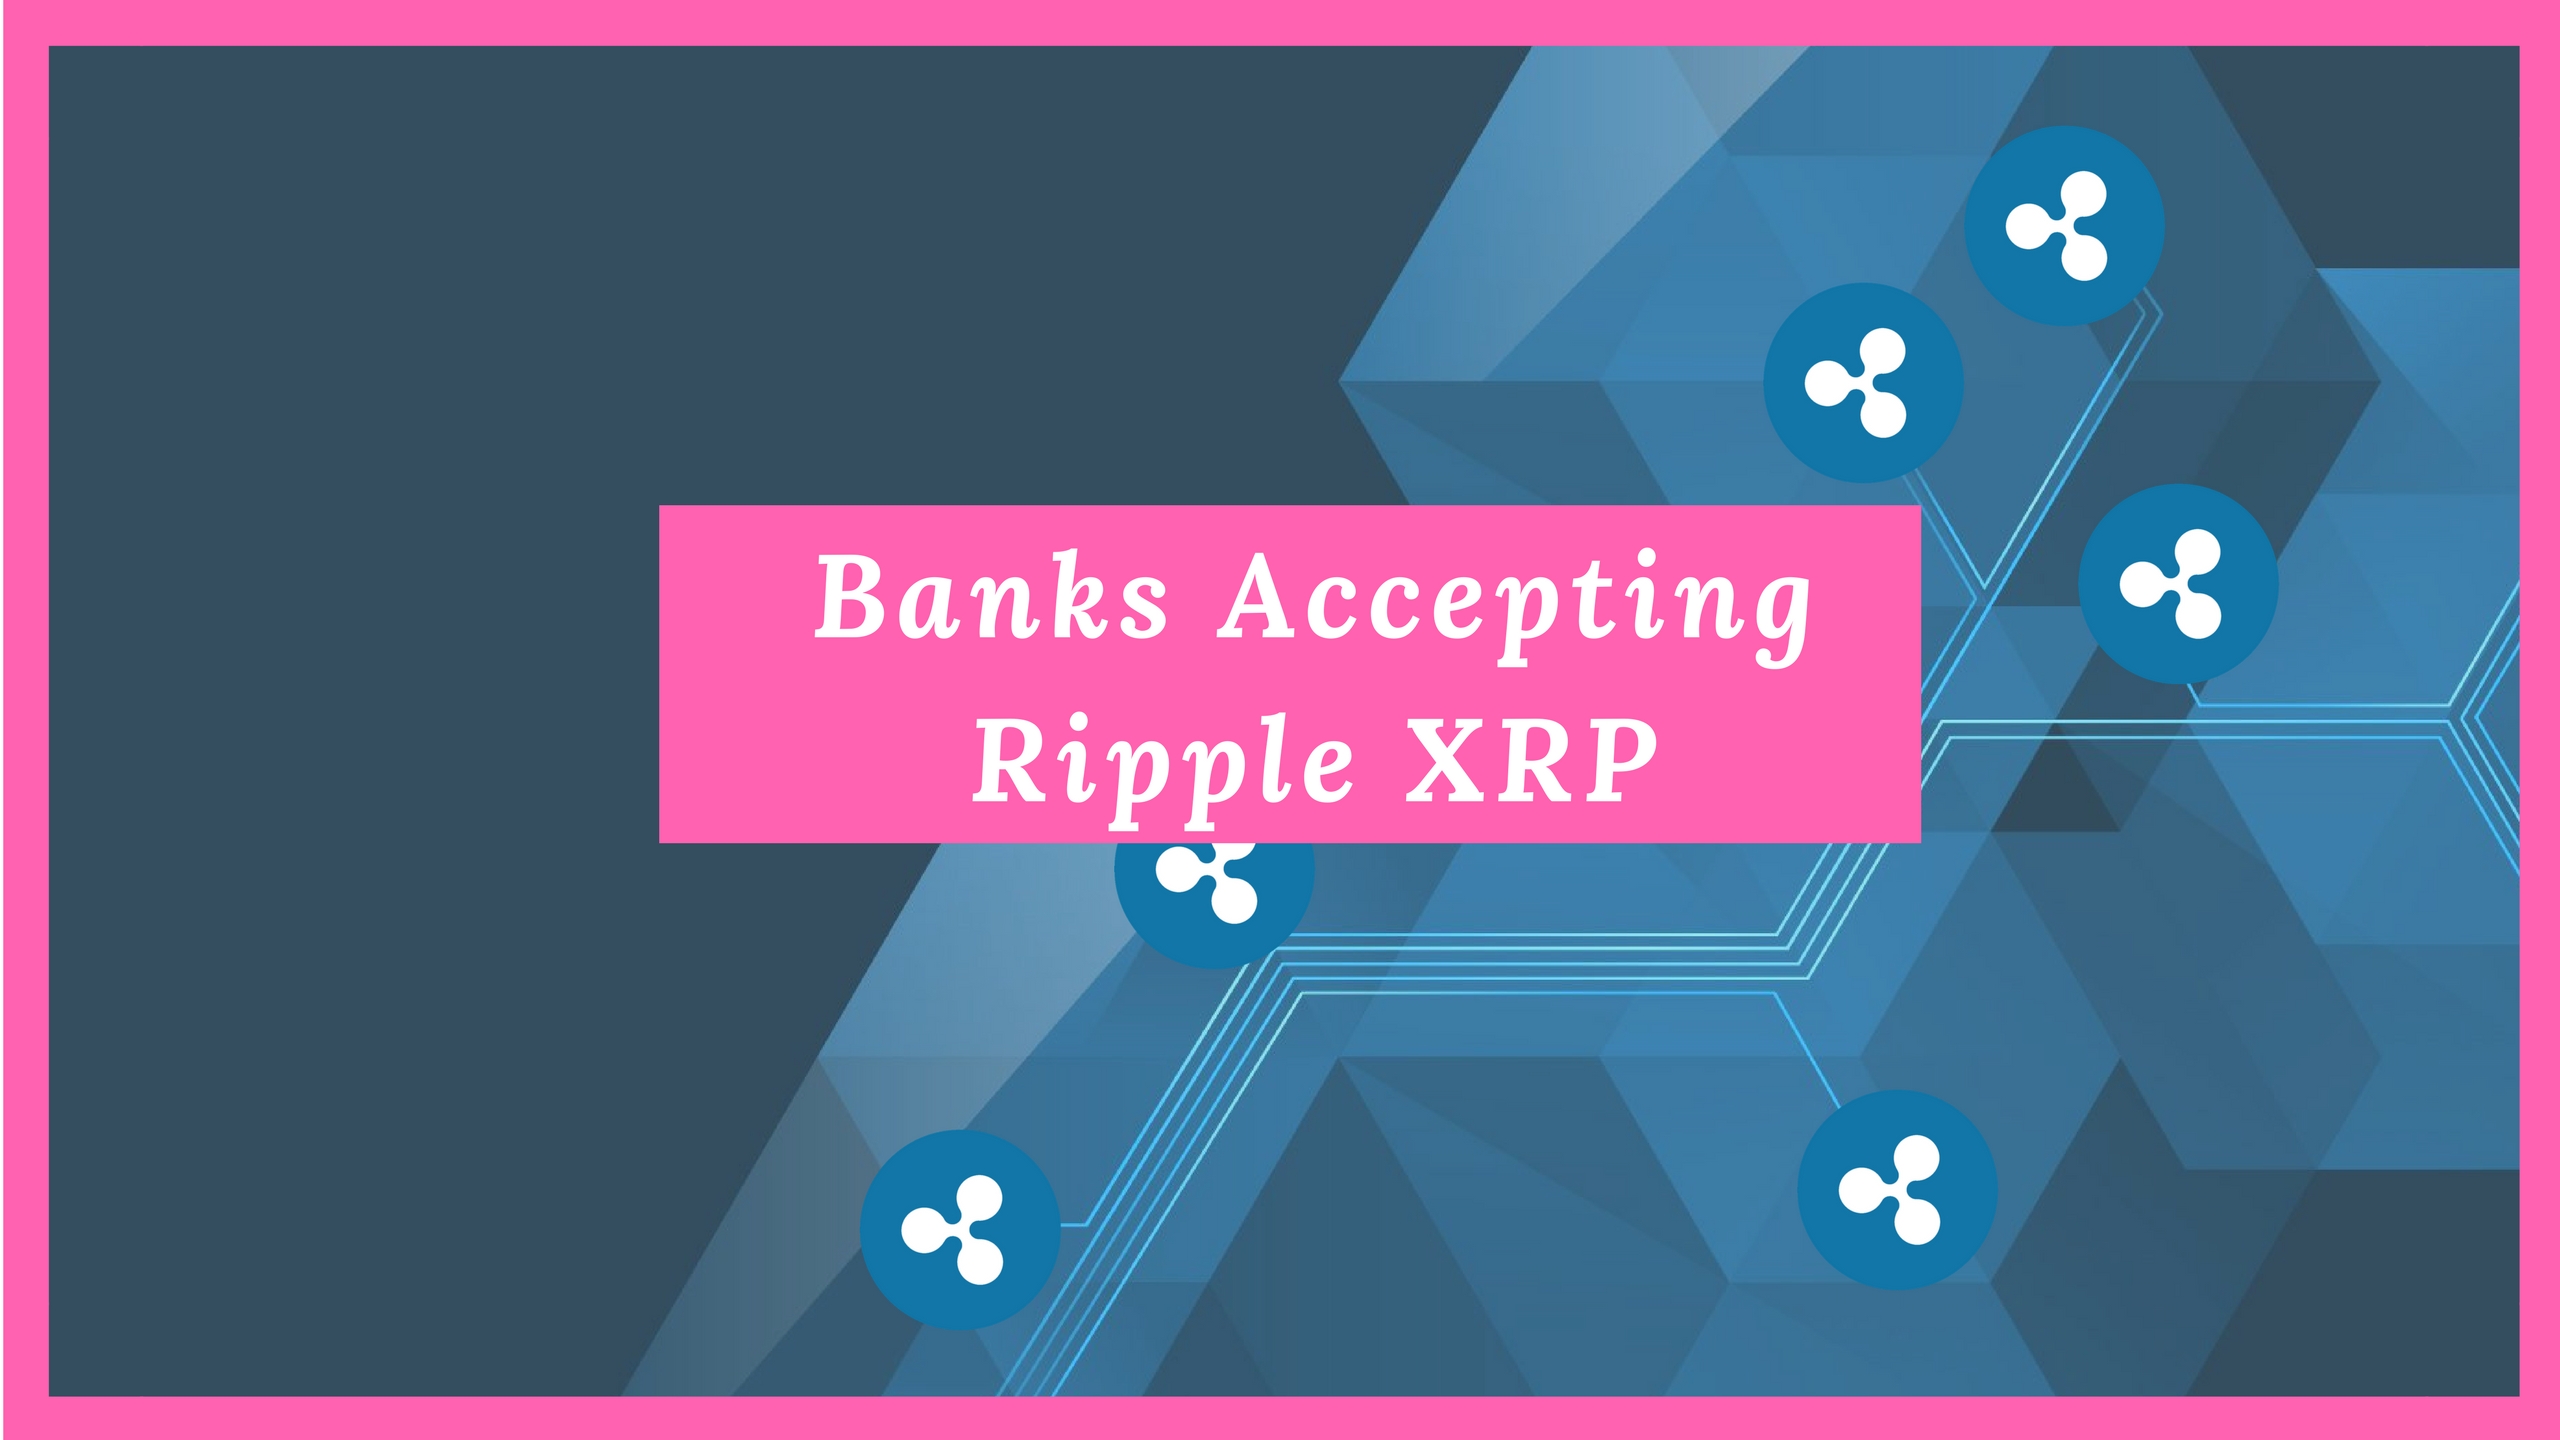 Banks Accepting Ripple XRP